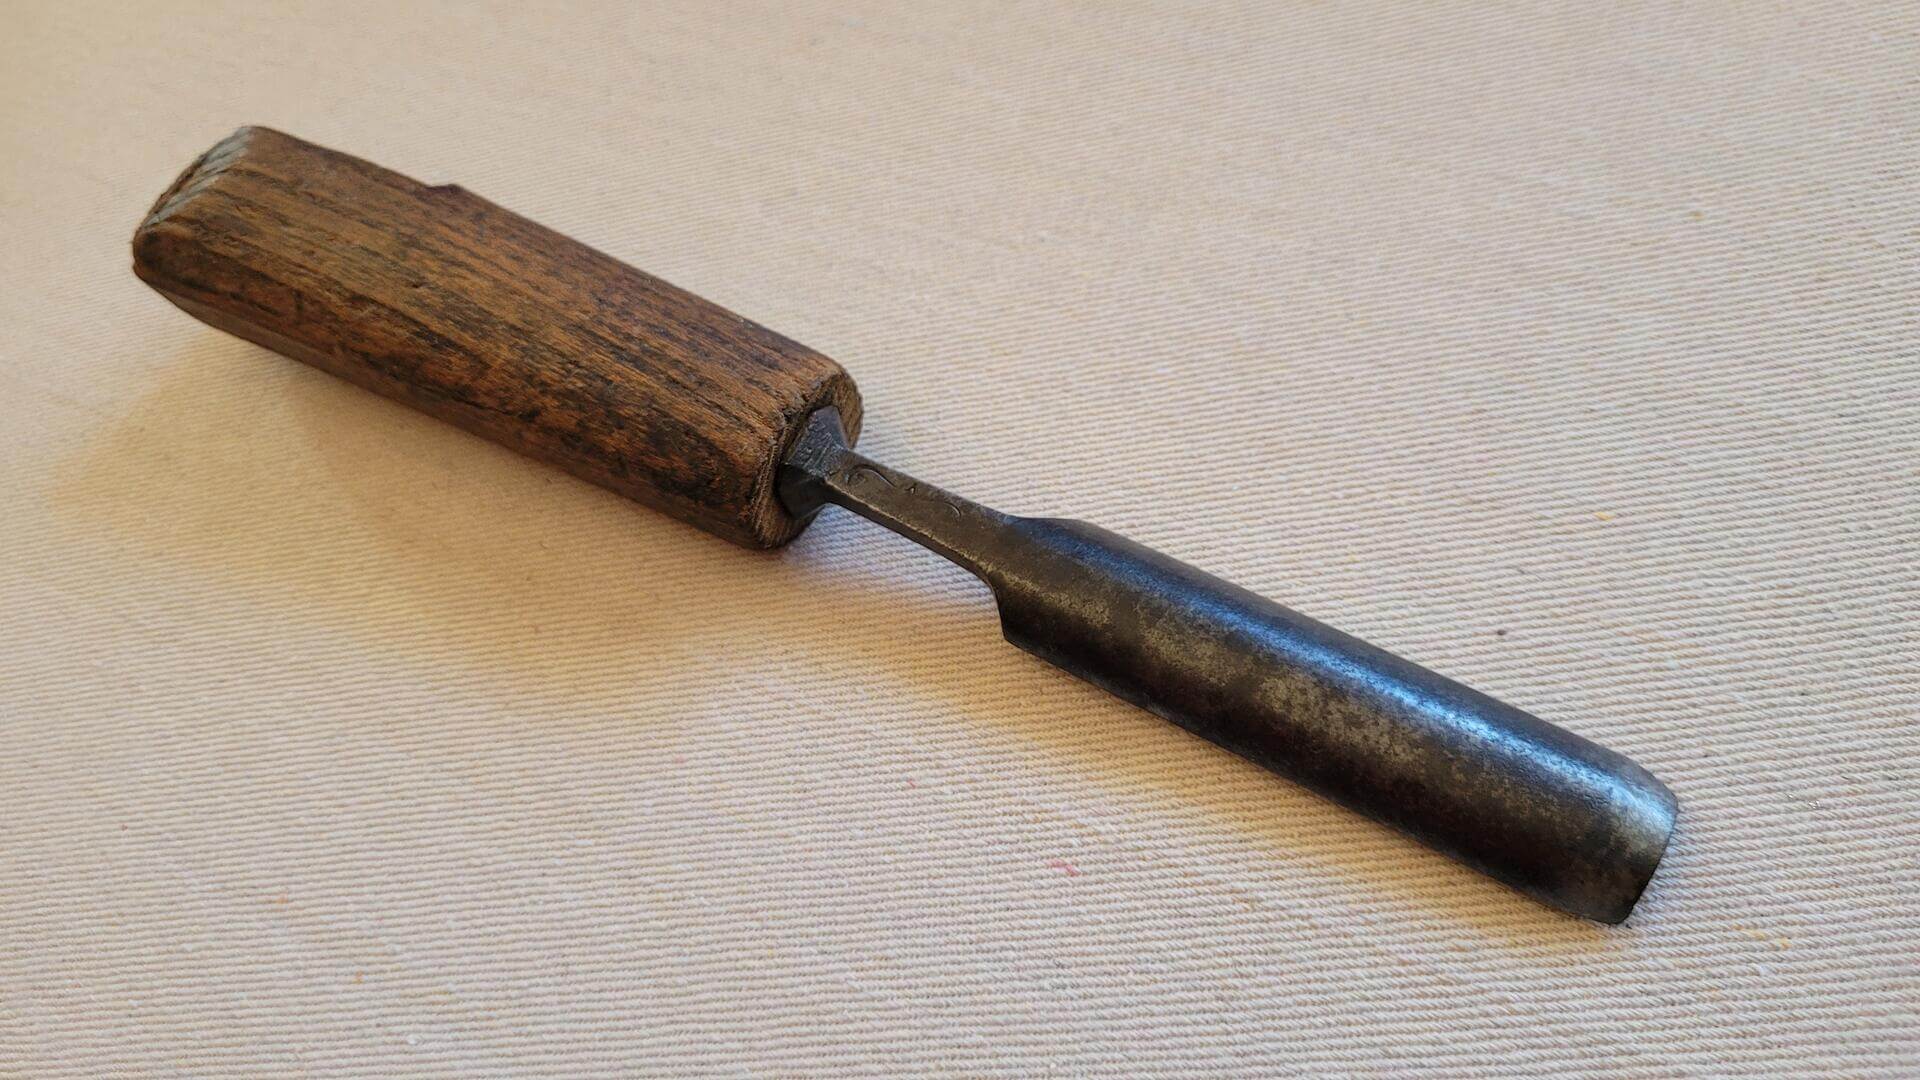 Rare vintage Thomas Firth and Sons cast steel carving gauge chisel with wooden handle. Early 20th century antique made in Sheffield England collectible carpentry and woodworking edge hand tools